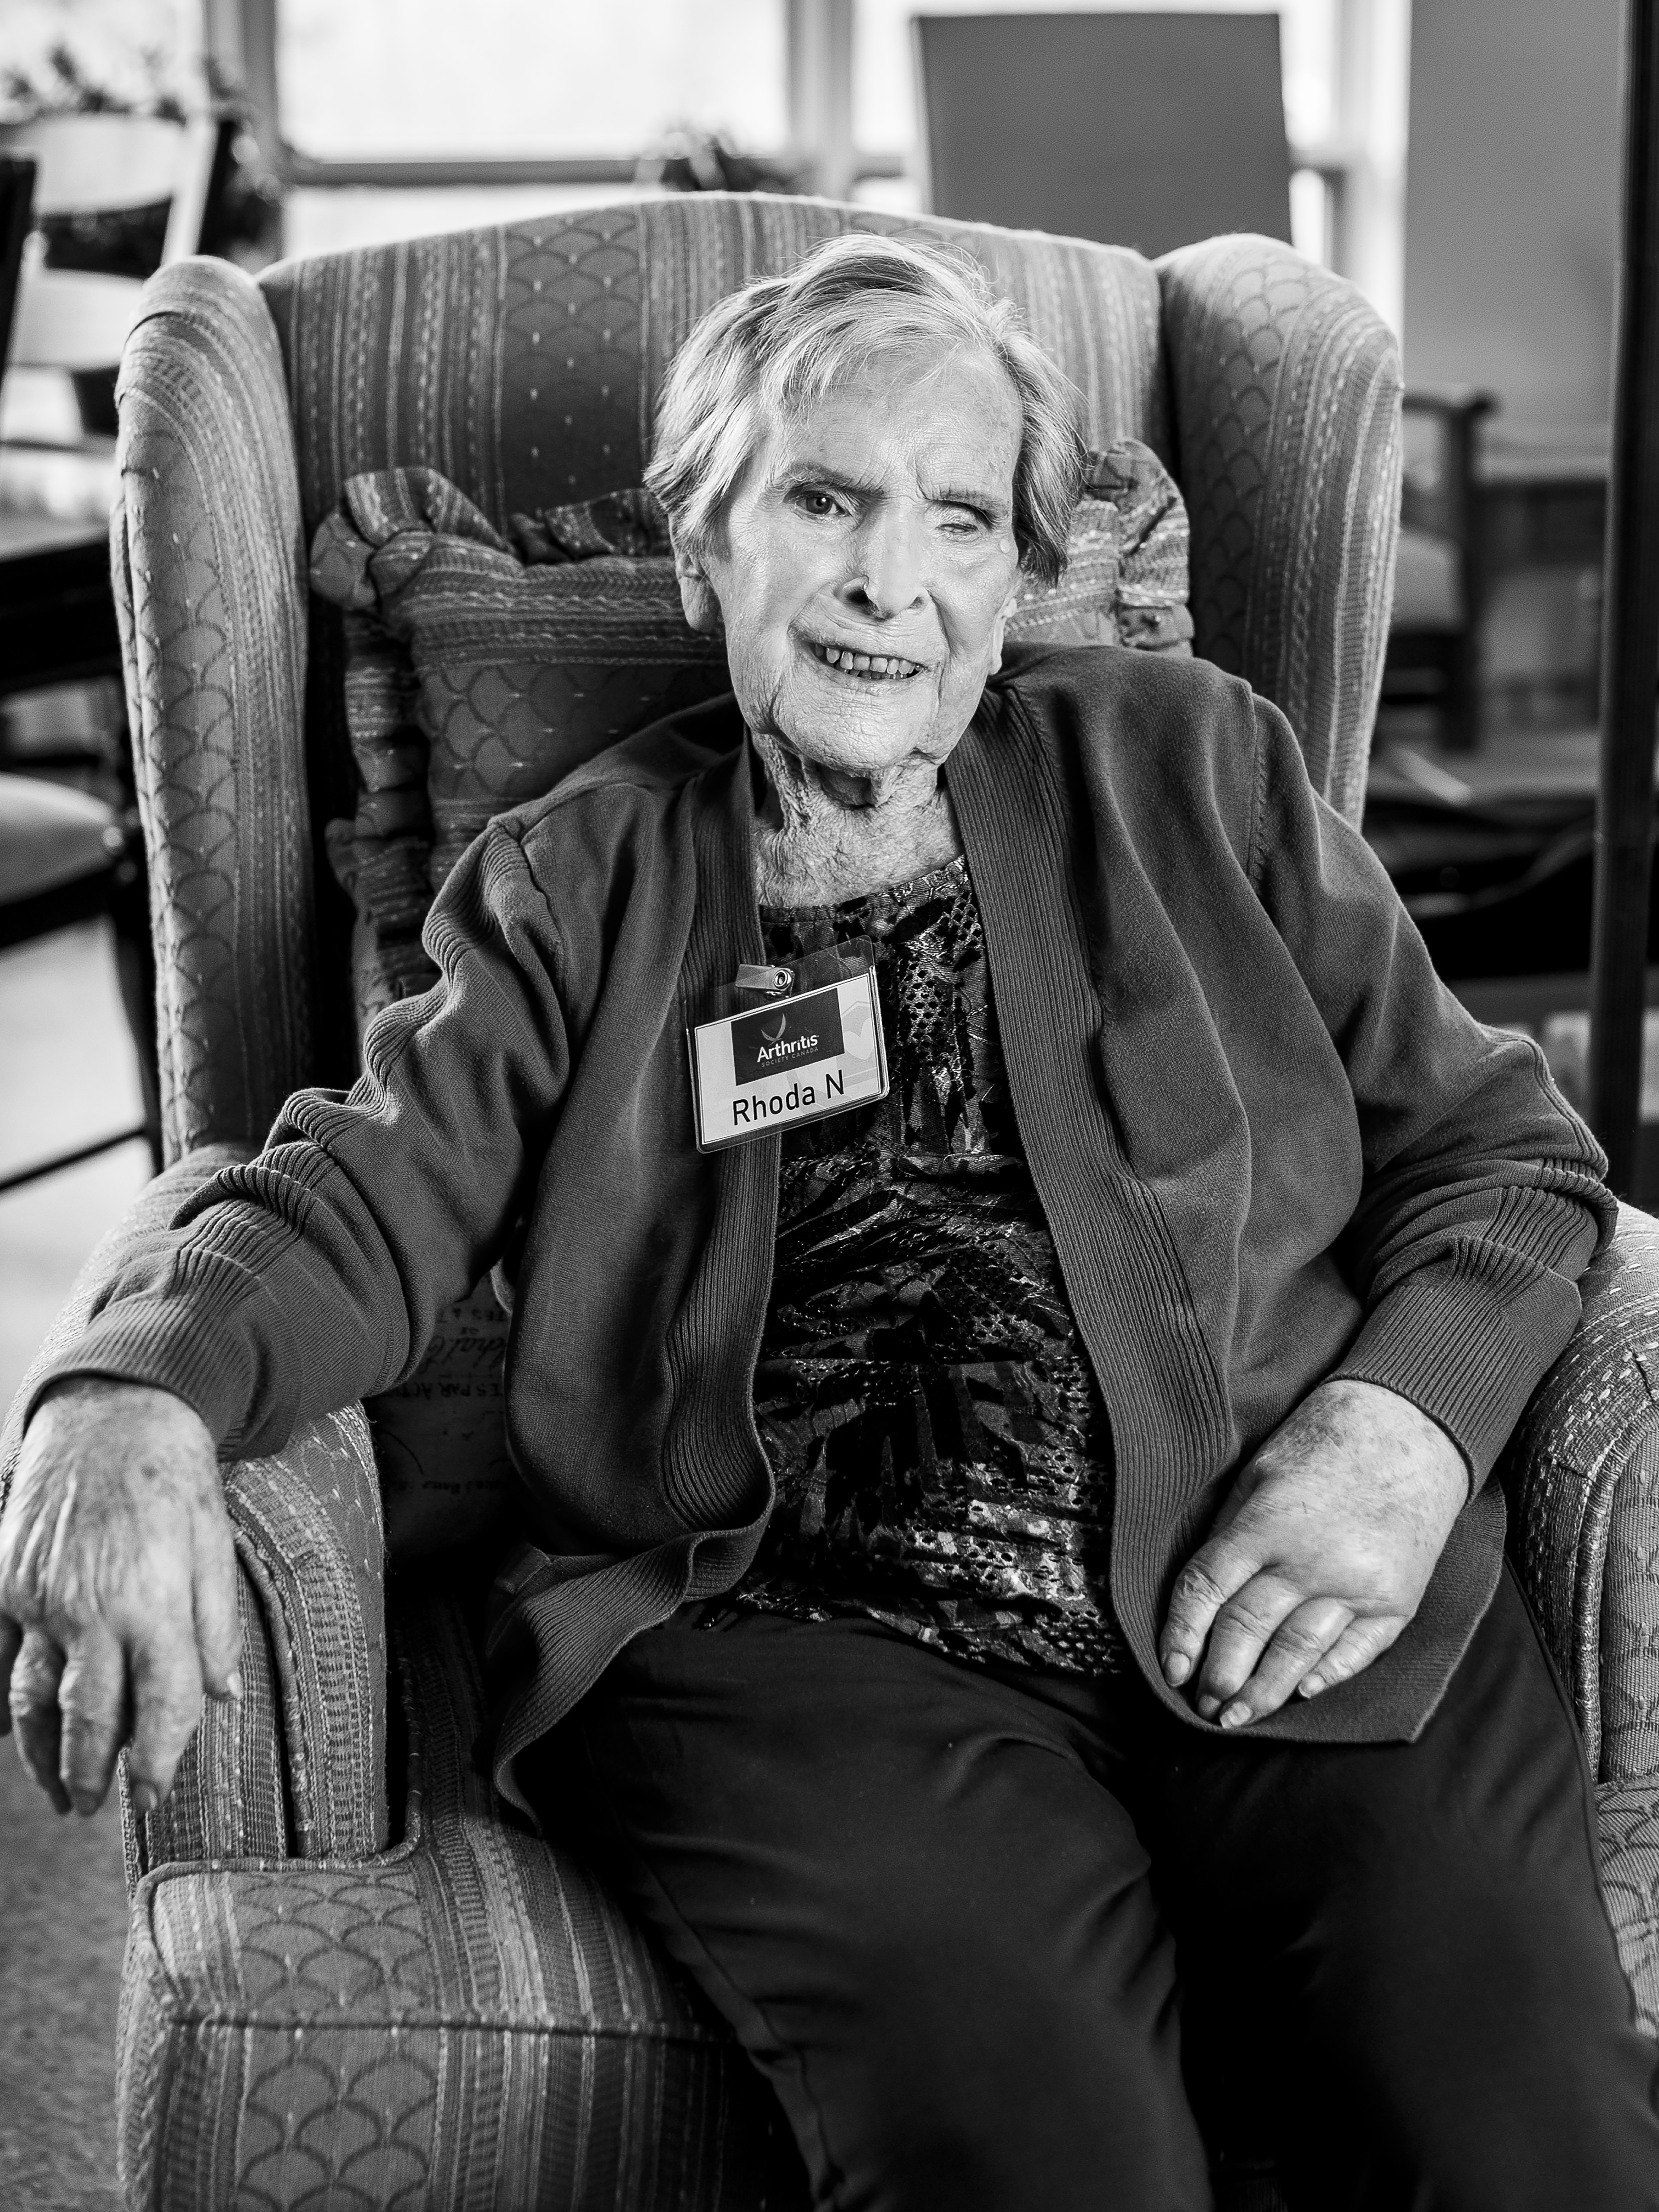 Rhoda black and white portrait wearing a volunteer name tag